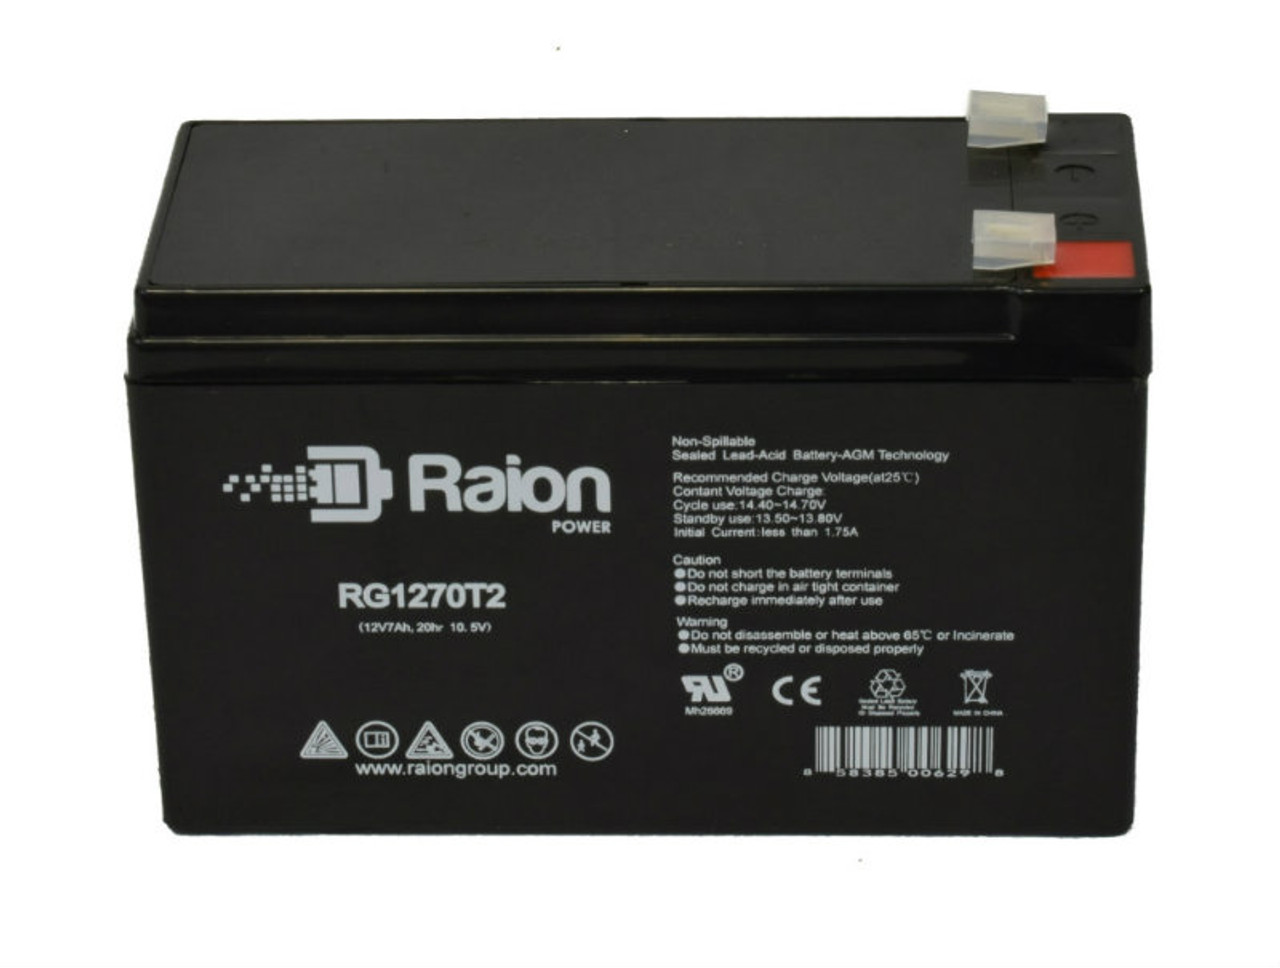 Raion Power RG1270T2 12V 7Ah AGM Battery for Pulse Performance Products PX-13